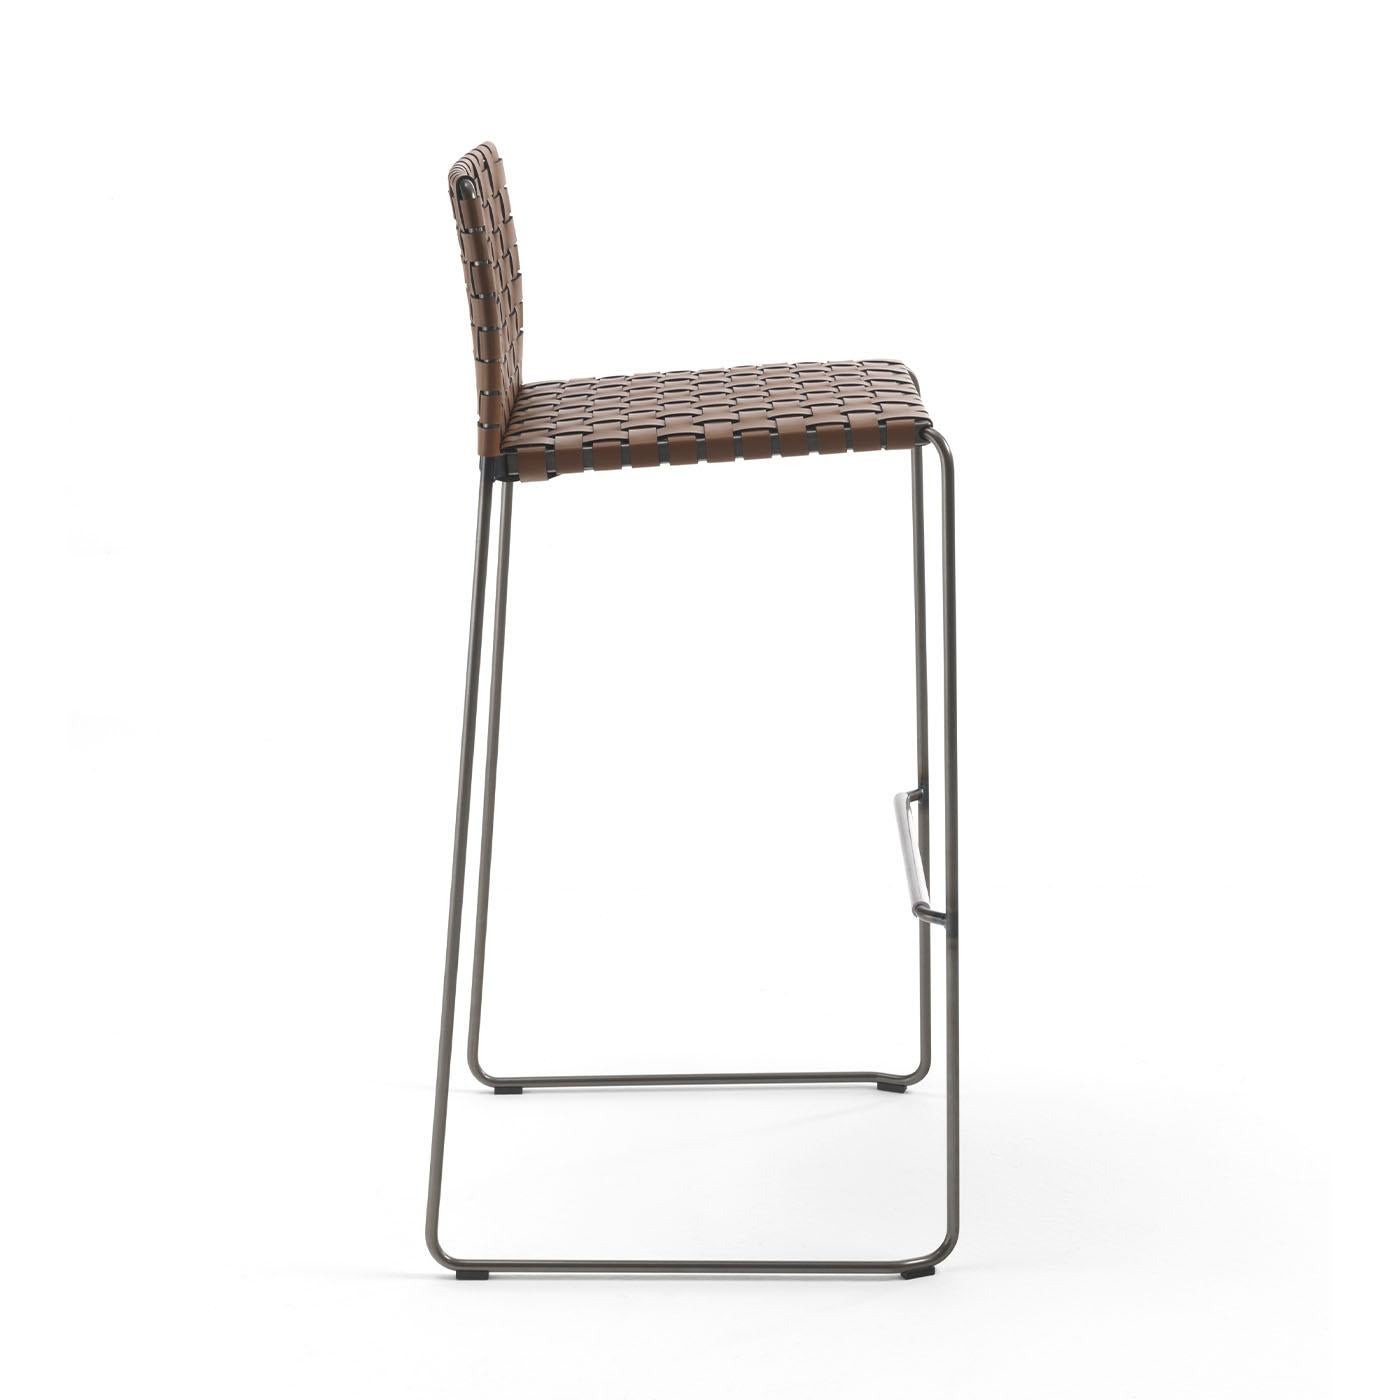 The characteristic features of Bizzy stool are its intelligent combination of materials and its form marked by clean lines and a clear design. Bizzy series has a sled base in a steel frame in a round section, available in 4 different finishes.